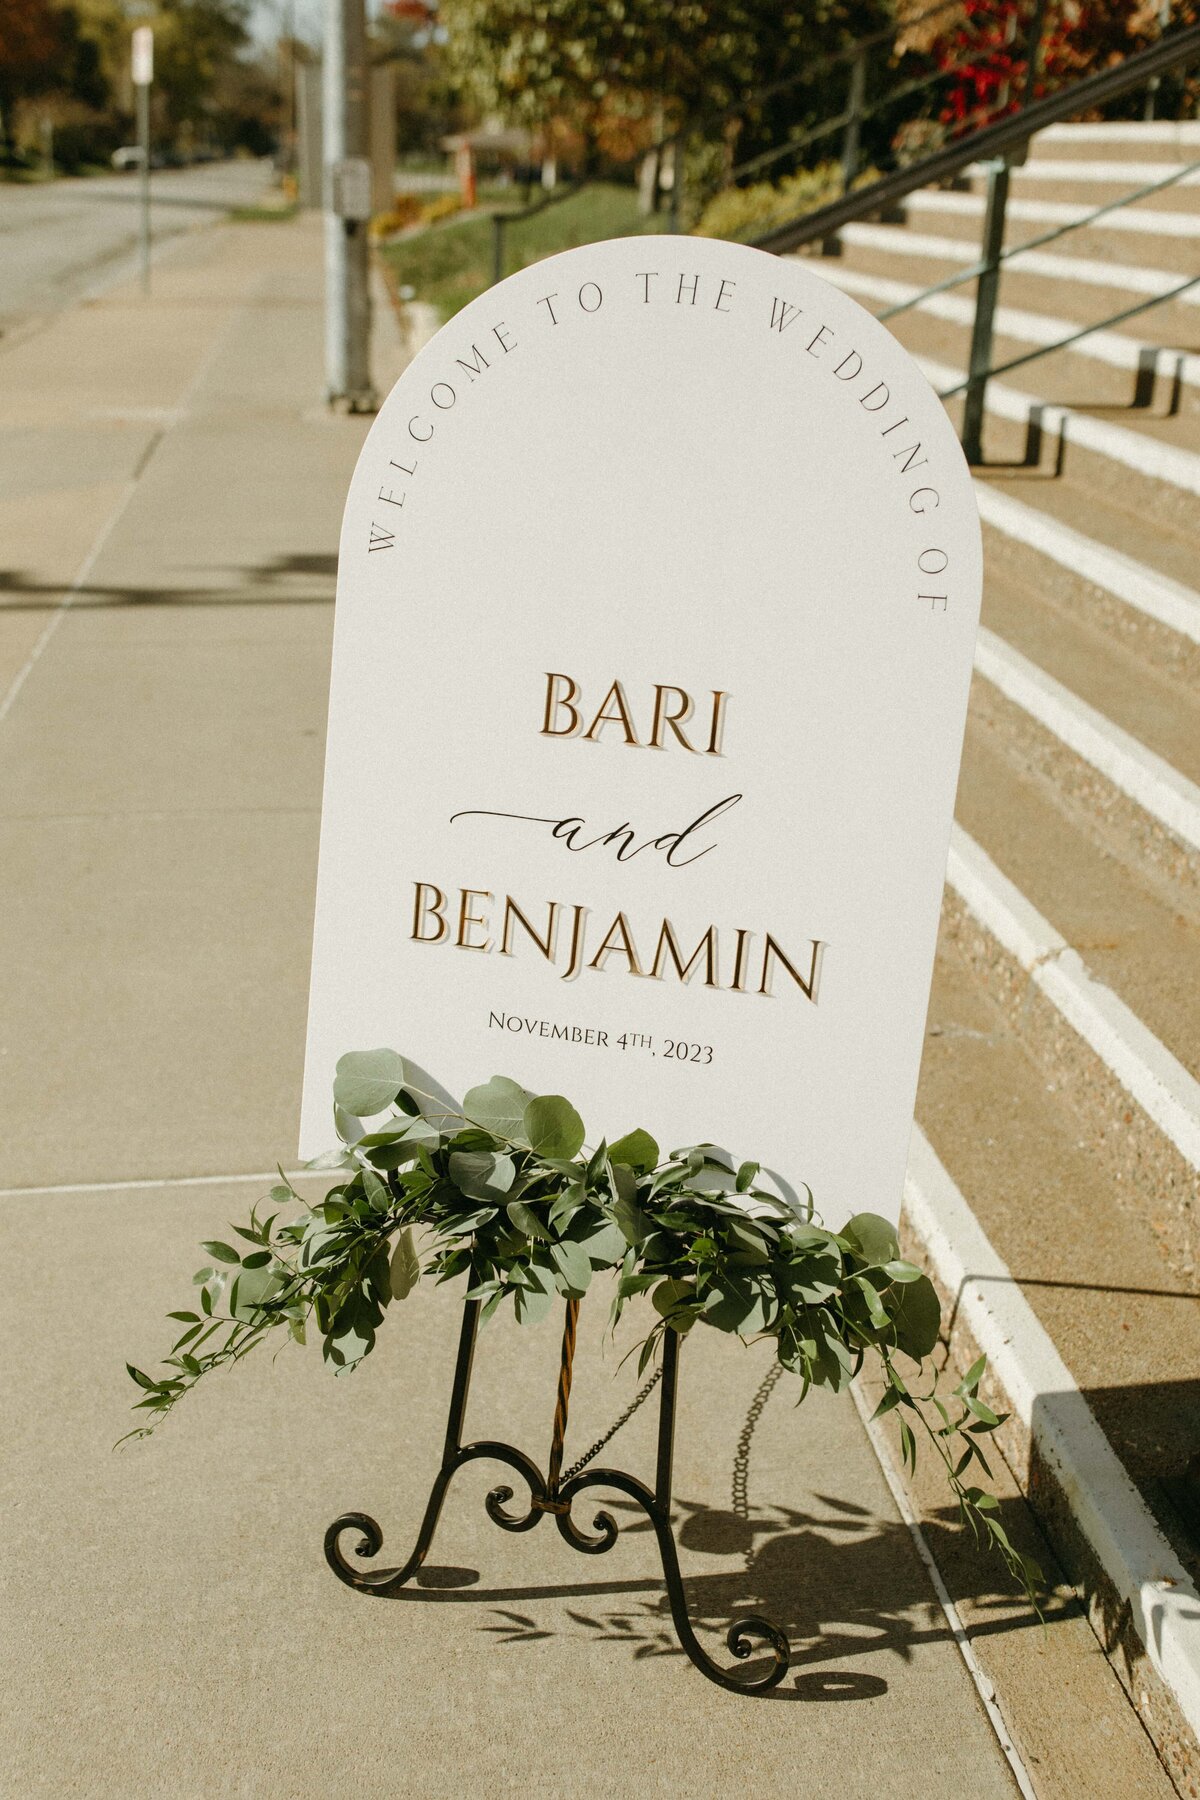 An elegant wedding welcome sign with the names "Bari and Benjamin" and the date "November 4th, 2023" on a sunny sidewalk in Davenport, adorned with green leaves.